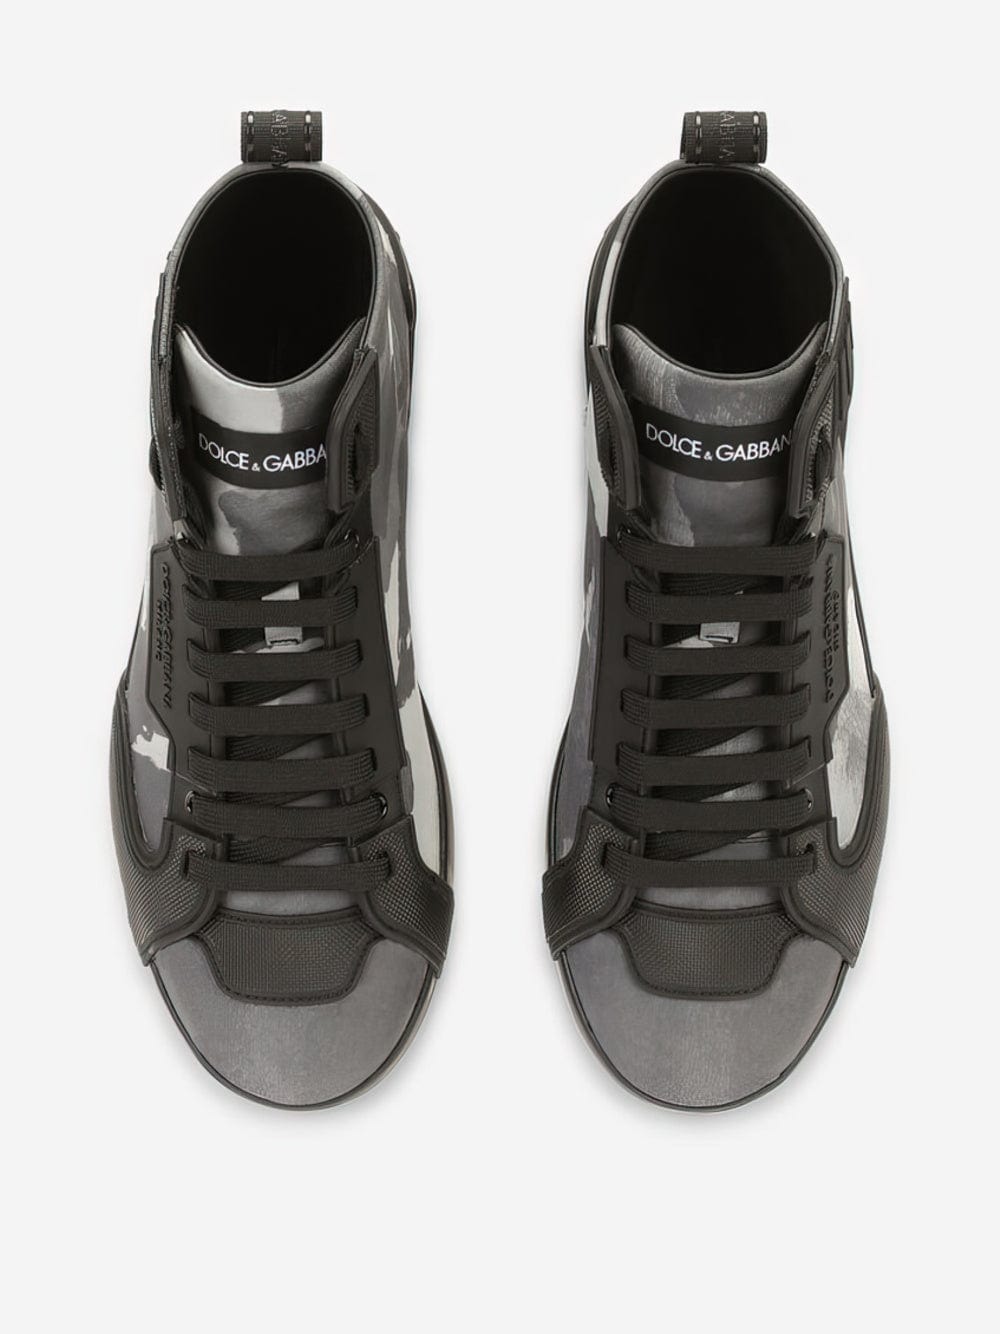 Dolce & Gabbana Camouflage High-Top Sneakers